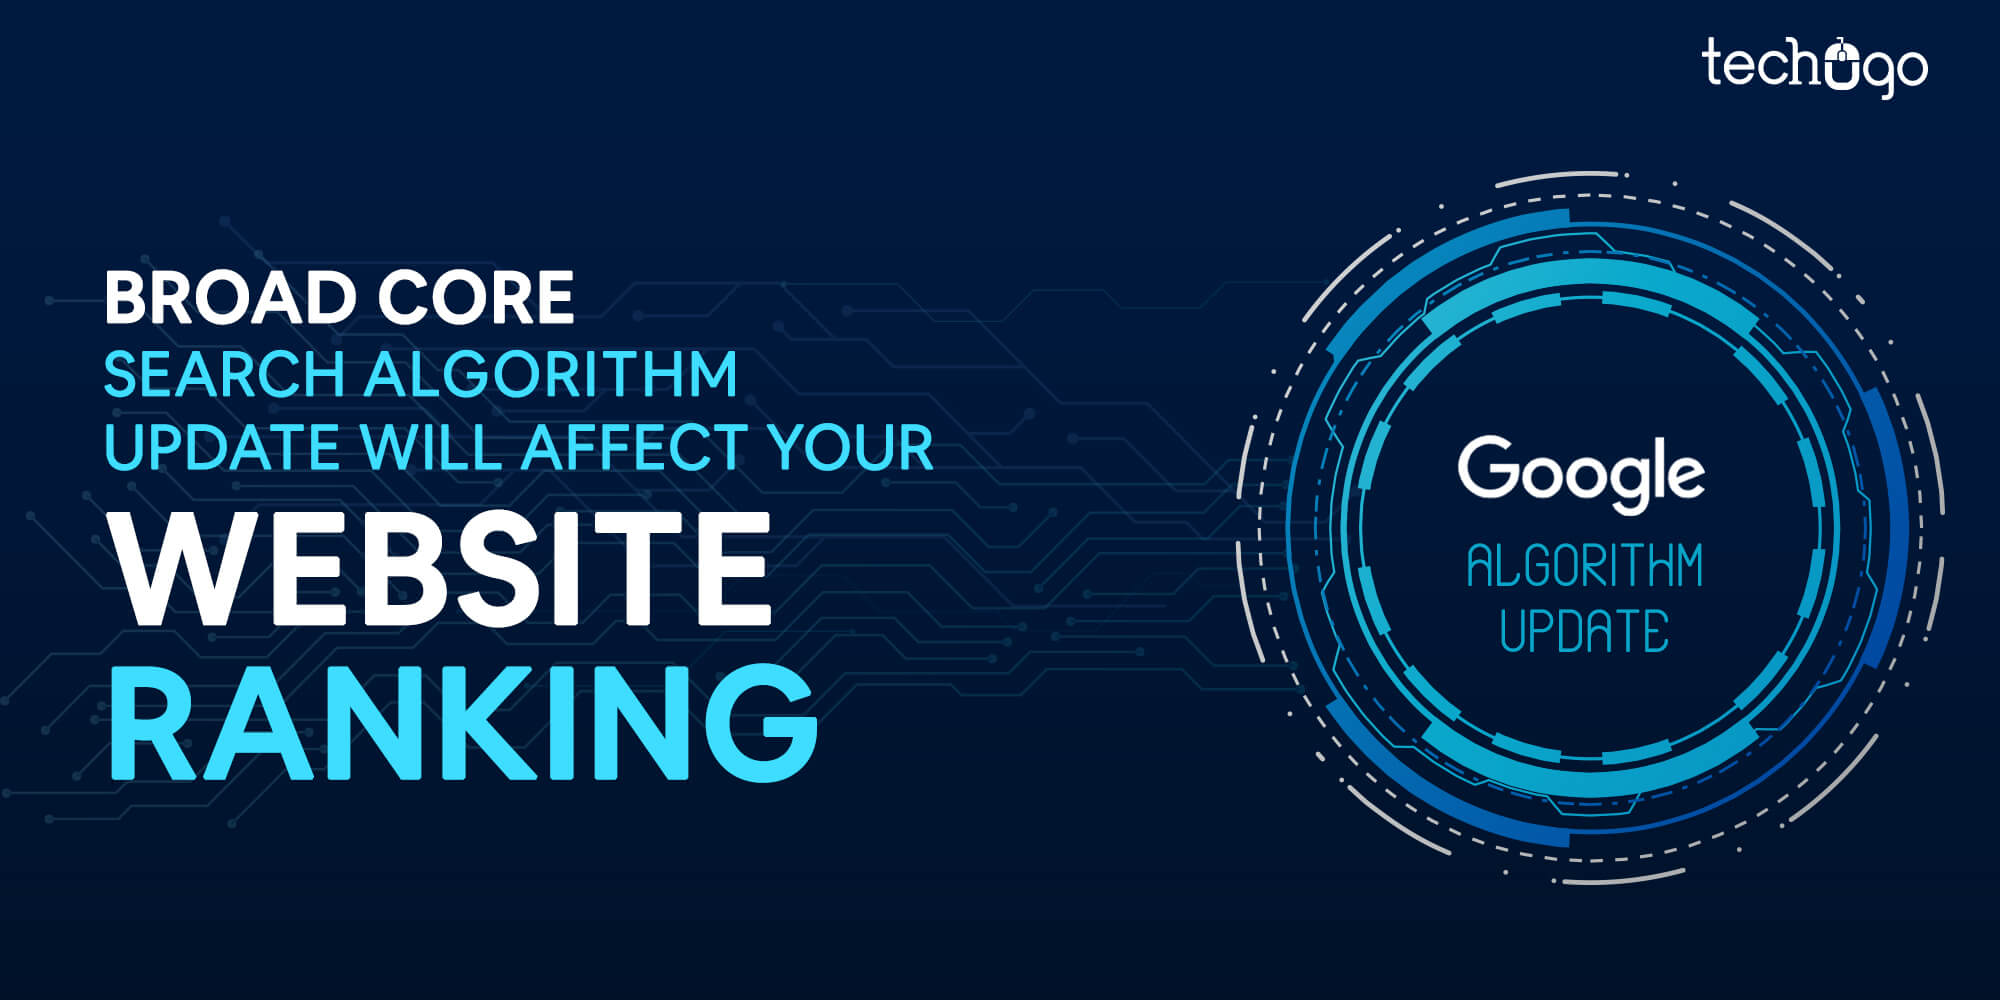 Broad Core Search Algorithm Update Will Affect Your Website Ranking